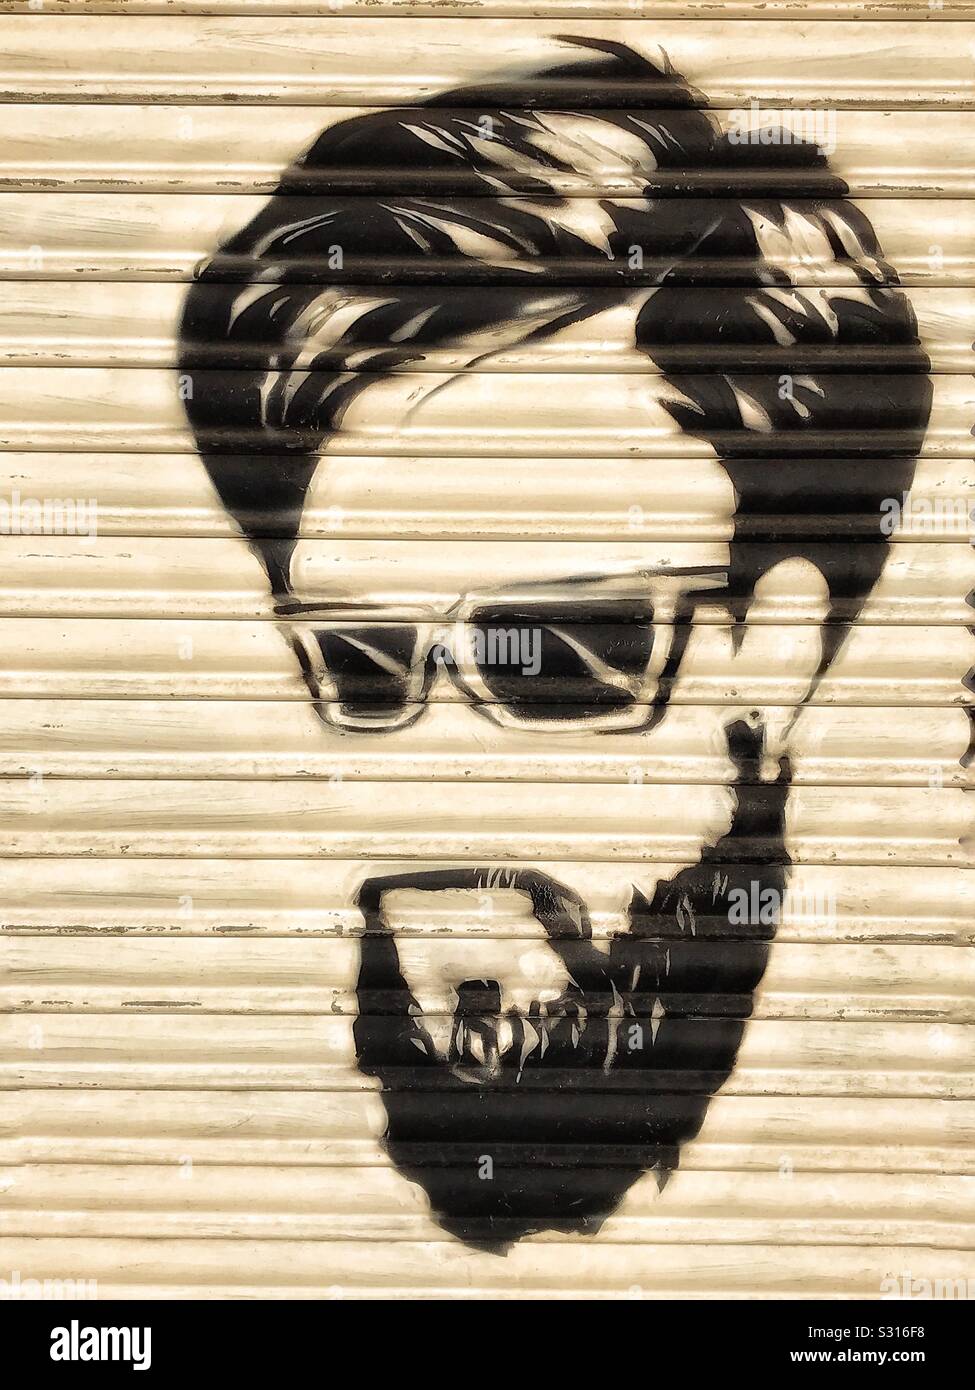 Shutter art. The portrait of a man with a beard and dark glasses is painted in black on the white shutters of a barbershop. Stock Photo